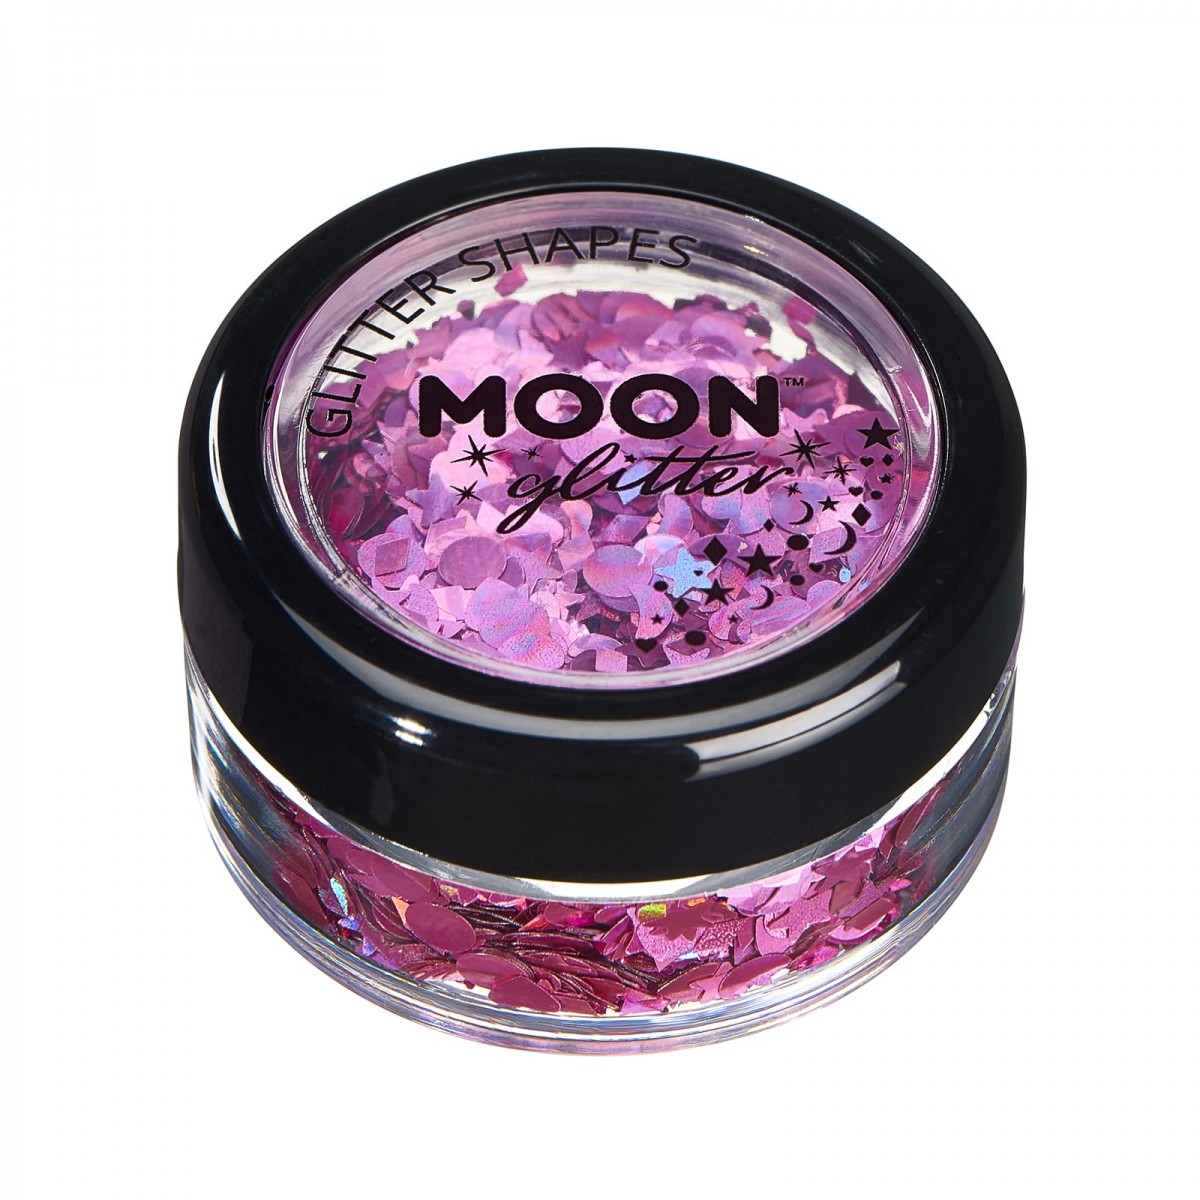 MOON CREATIONS G31 HOLOGRAPHIC GLITTER SHAPES PINK 3g